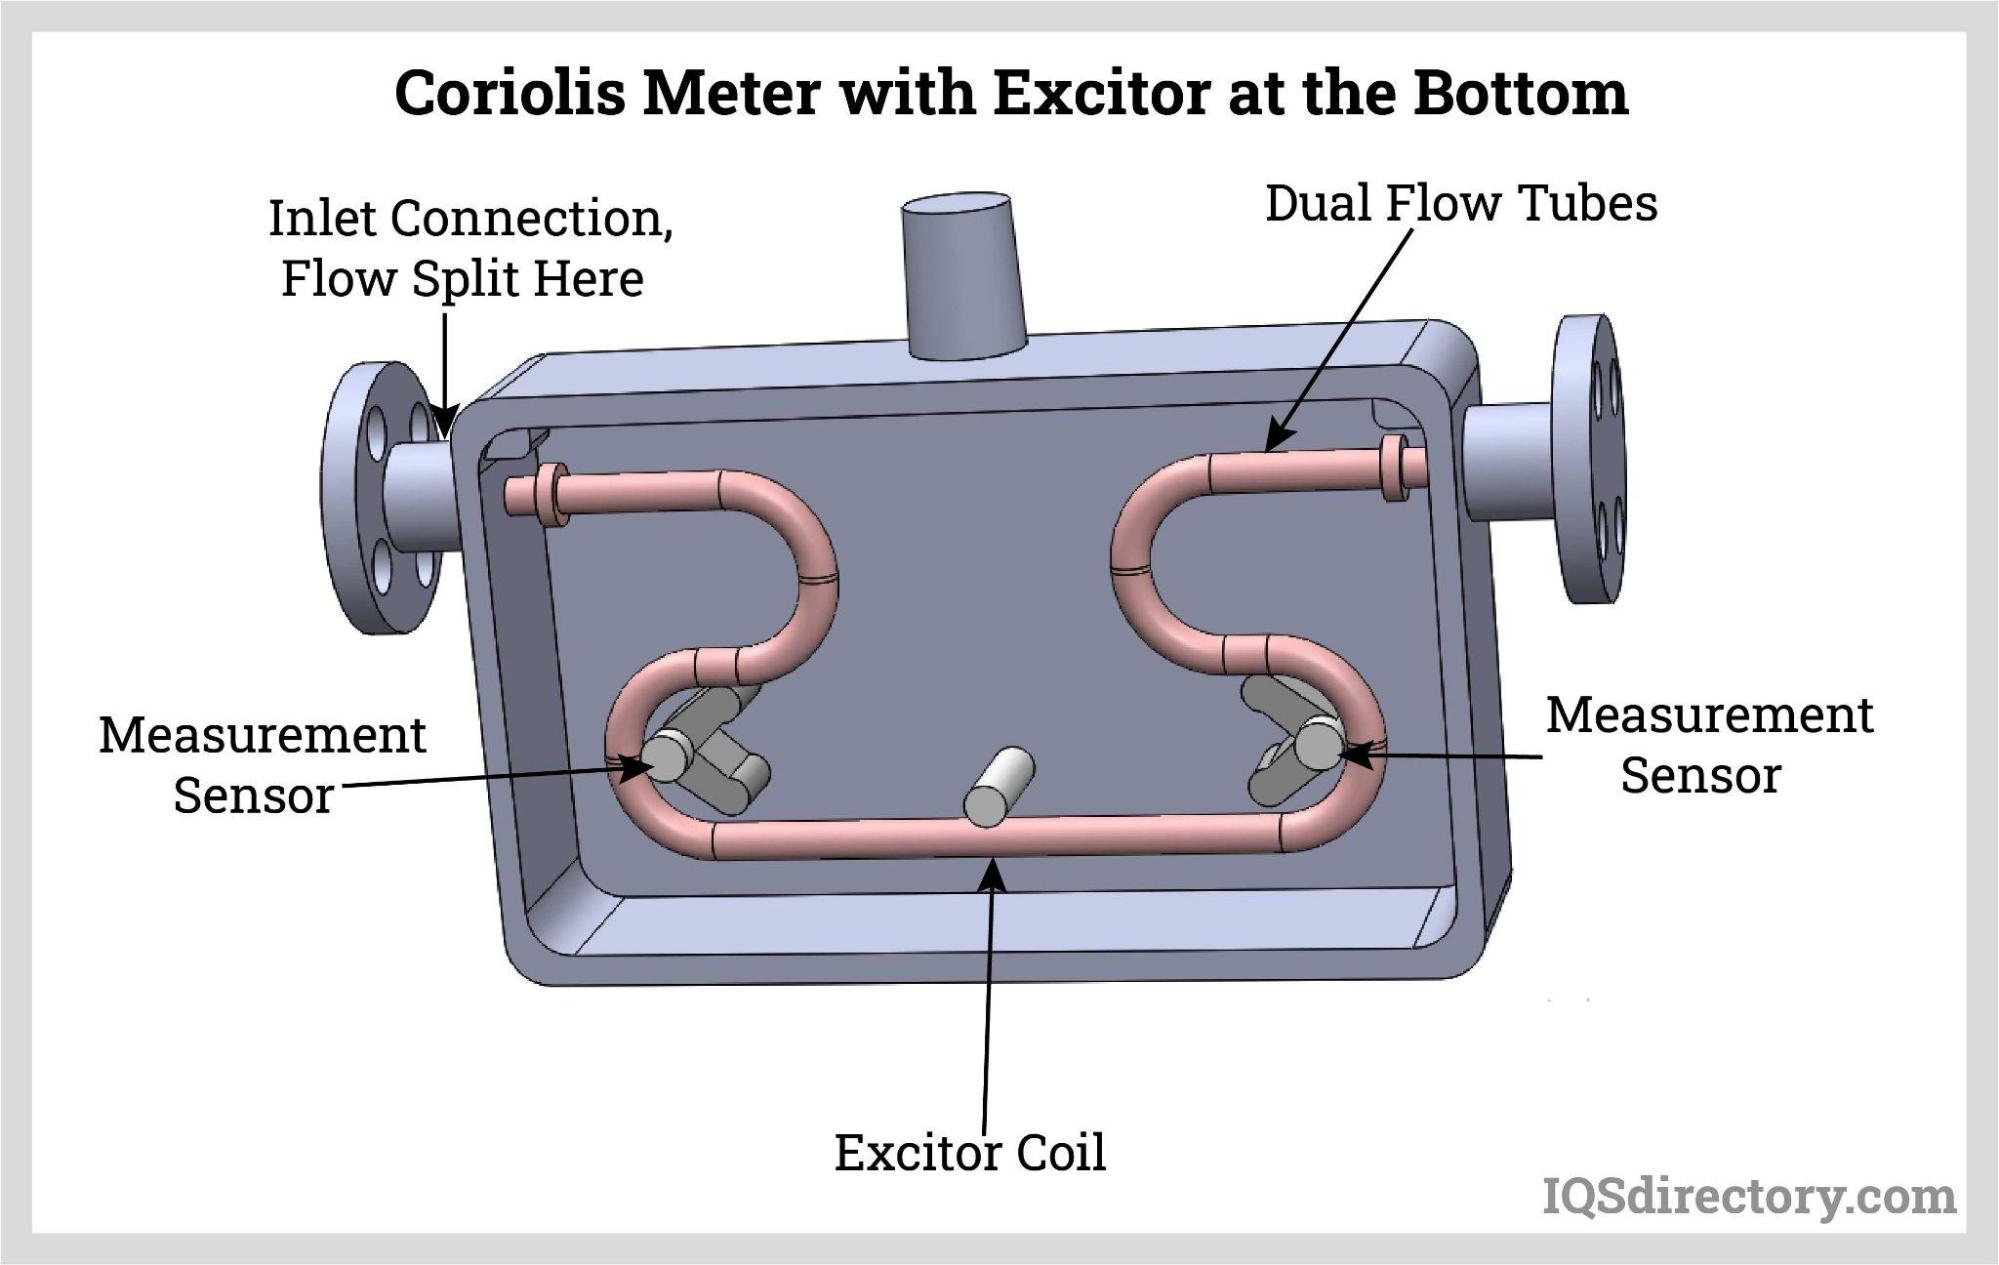 Coriolis Meter with an exciter at the bottom